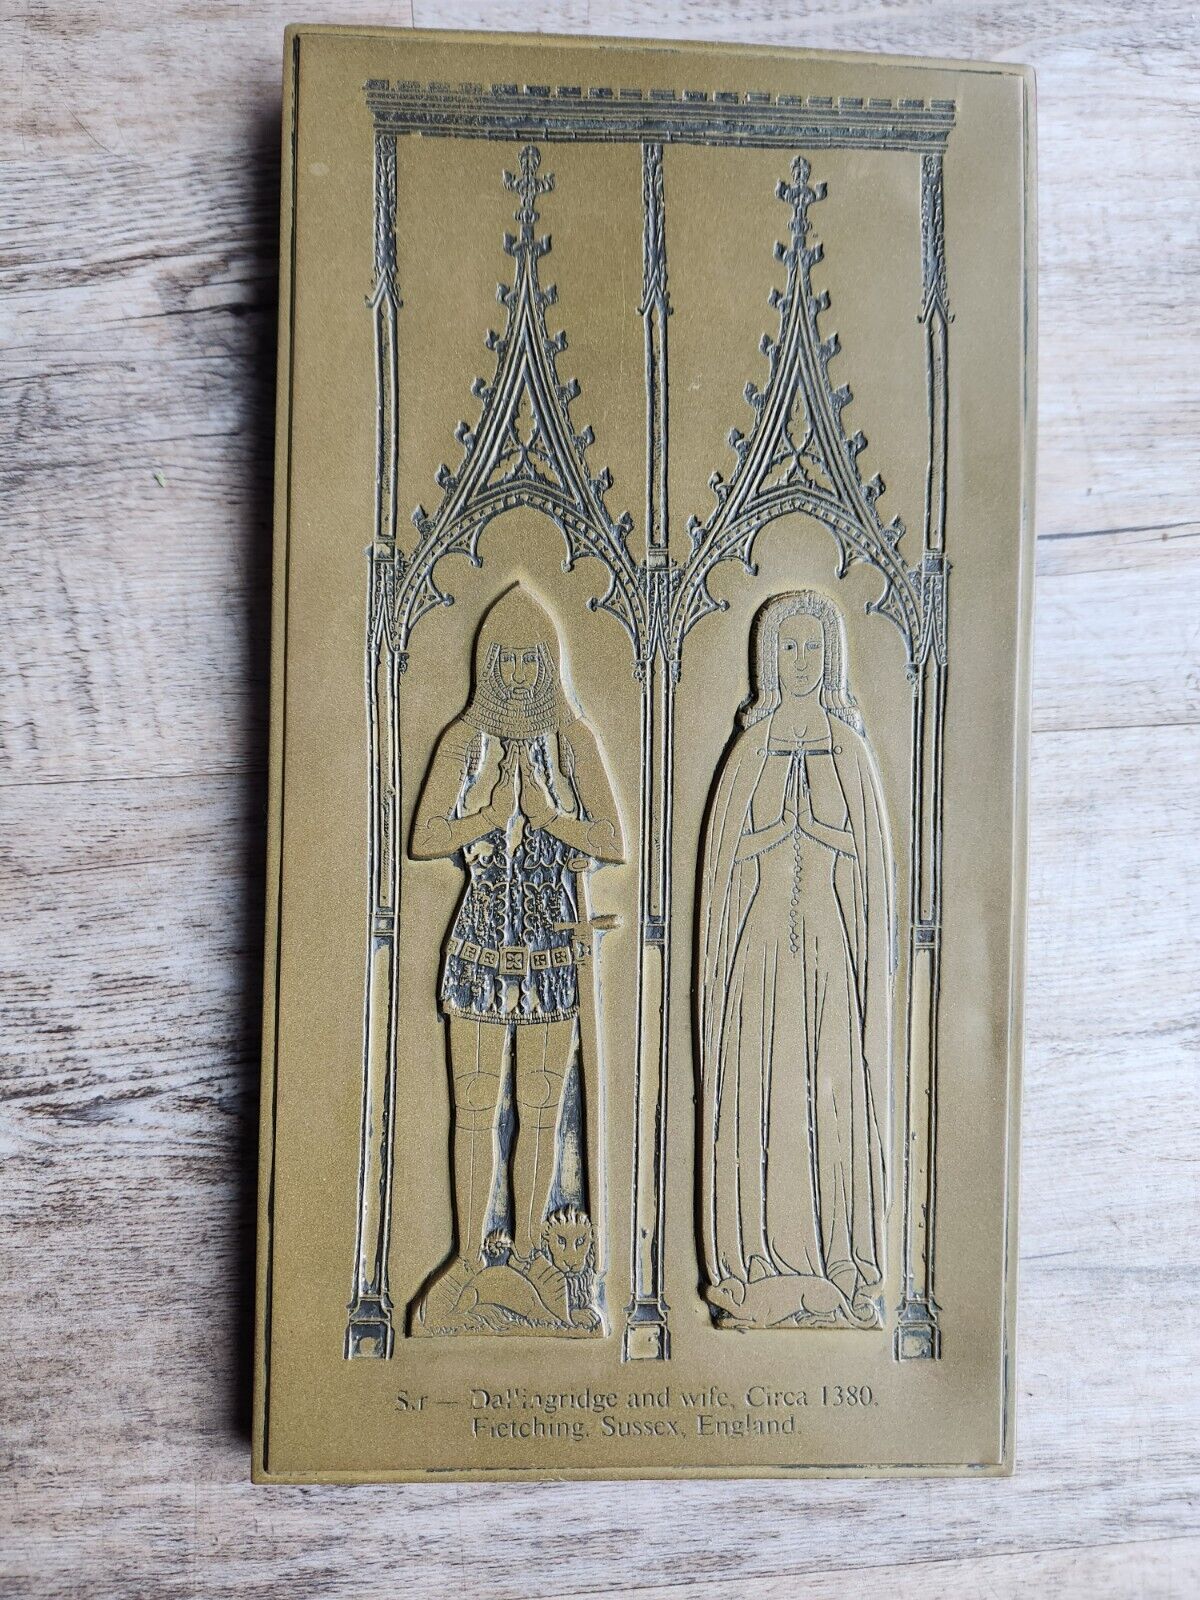 Sir Dallingridge And Wife, Circa 1380 Brass Plaque Vintage Great Condition